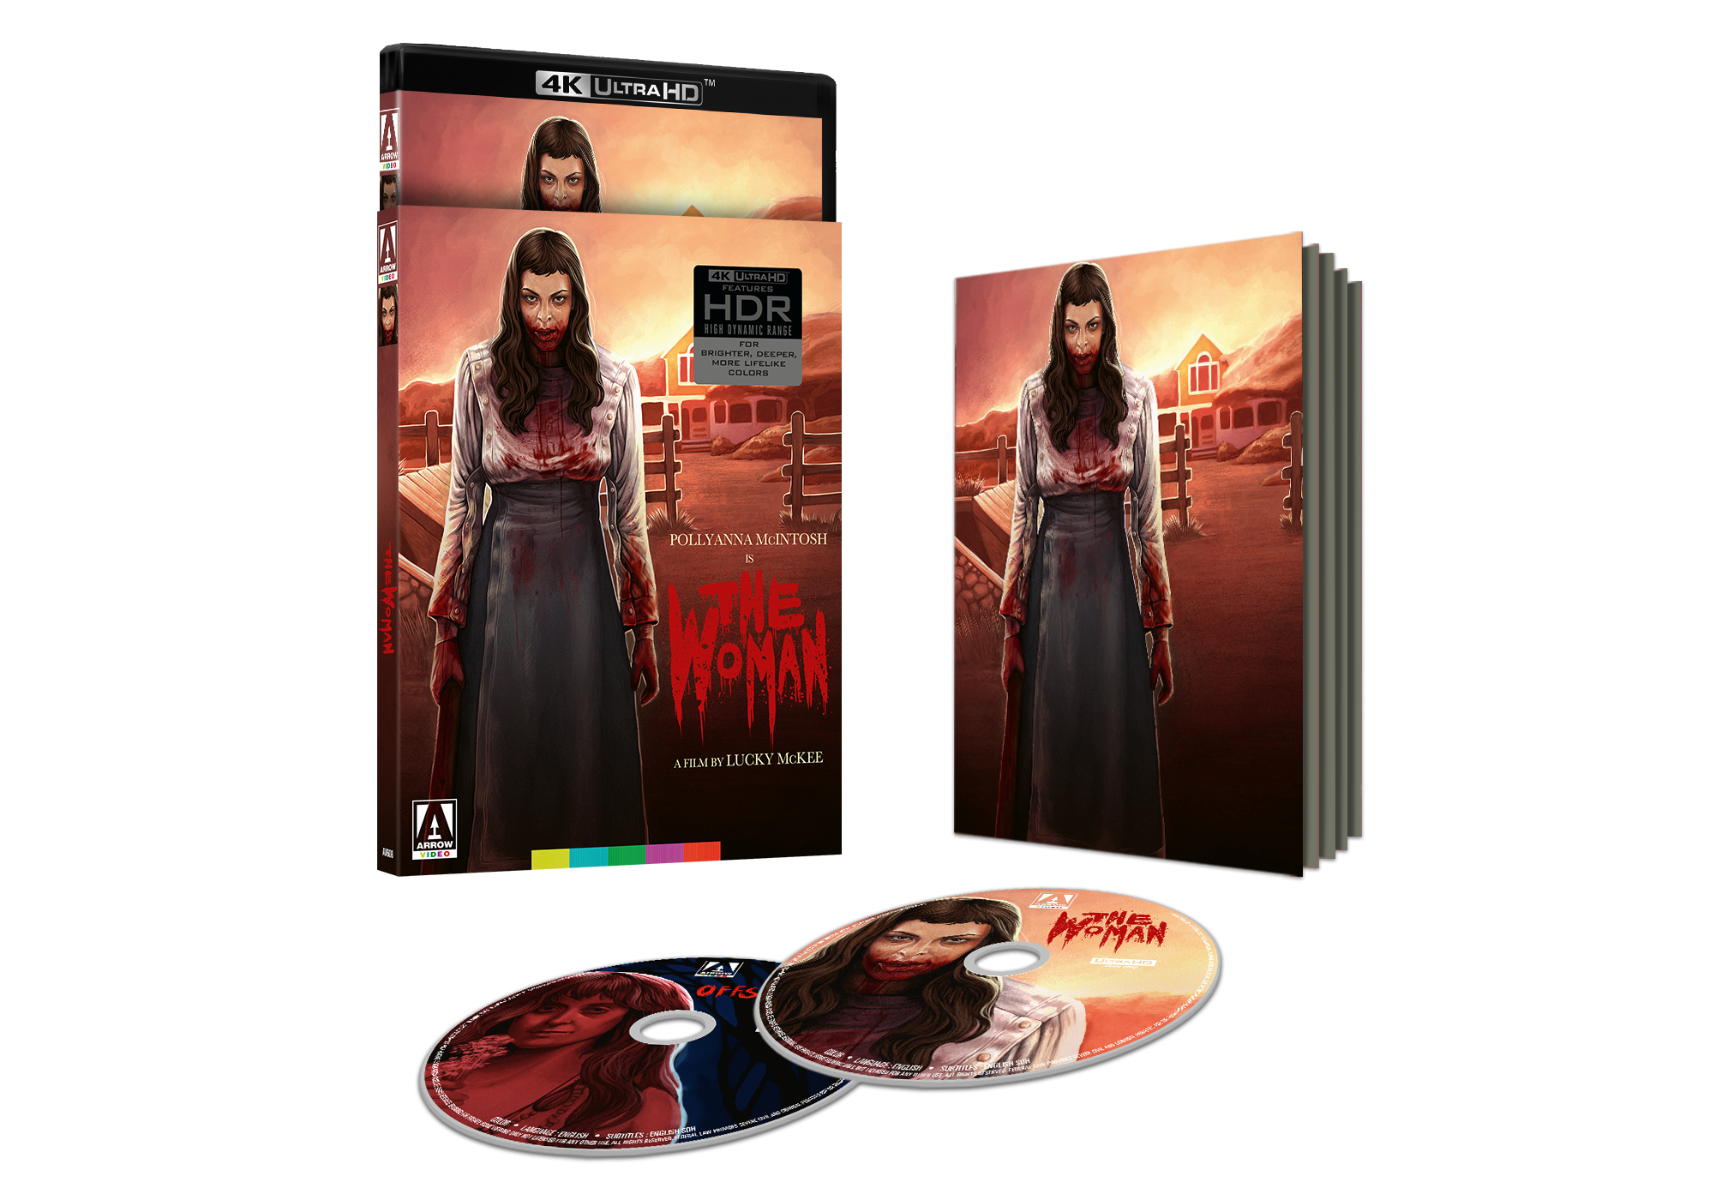 54335_2_the_woman_the_offspring_double_pack_uhd_exploded_packshot_us_v1a.png